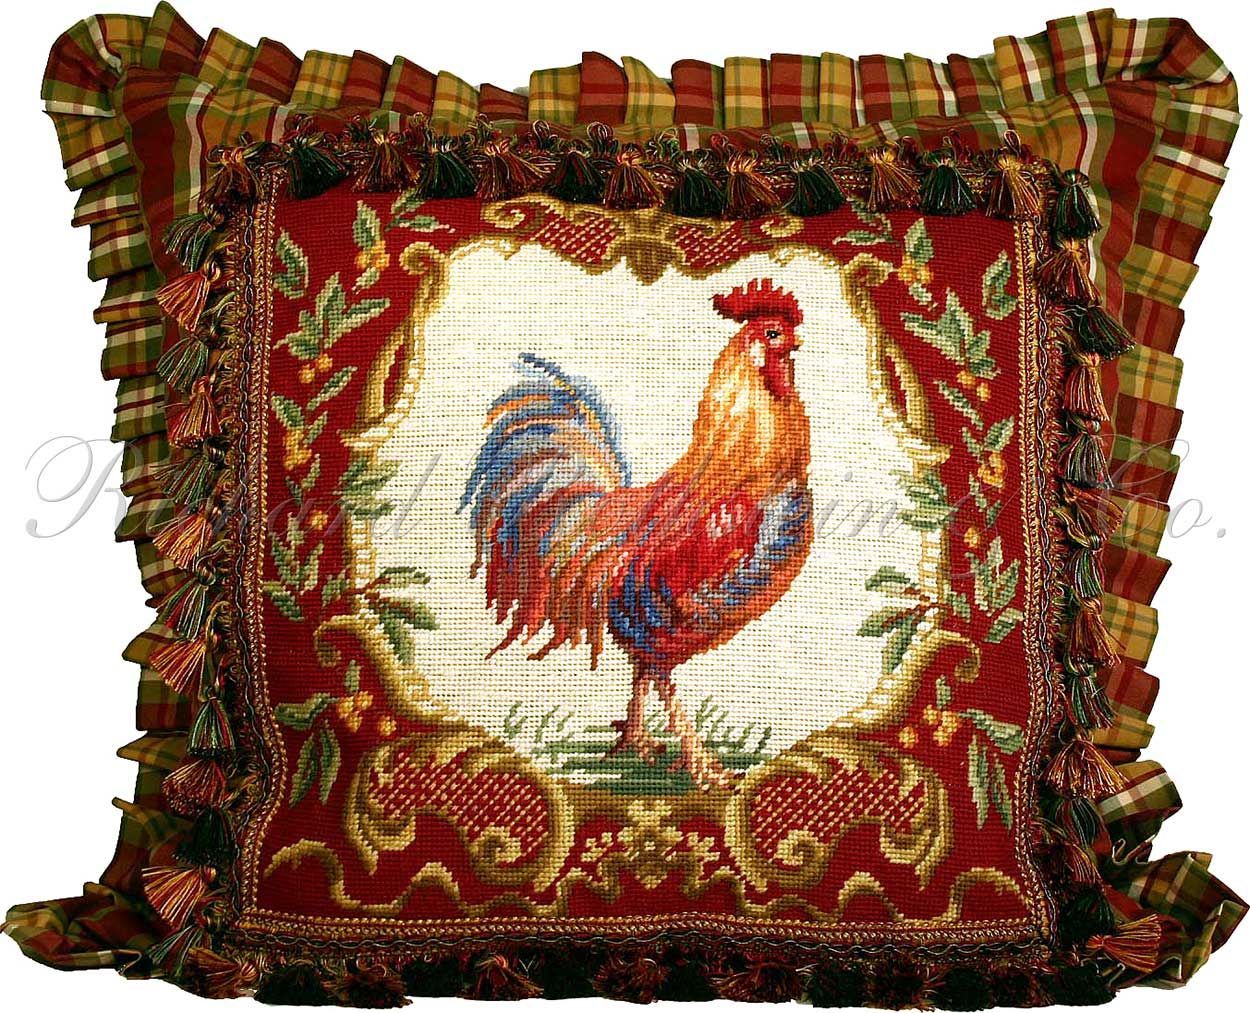 rooster pillow - Google Search -   25 decor pillows red
 ideas